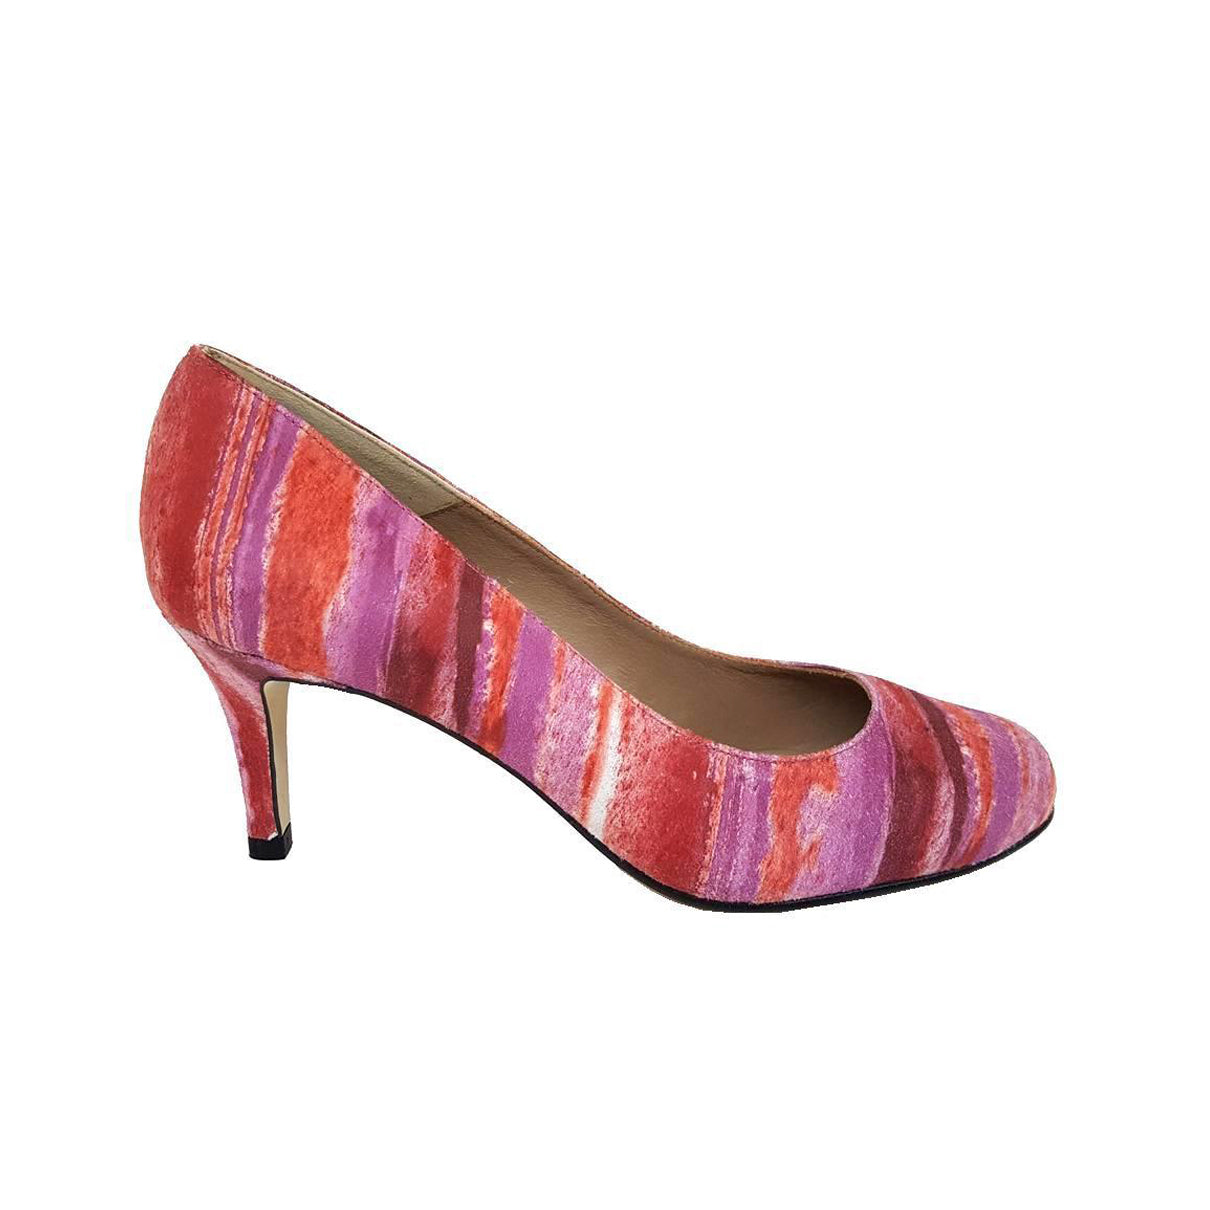 VETE Printed Leather Suede "Wine" Red-Pink